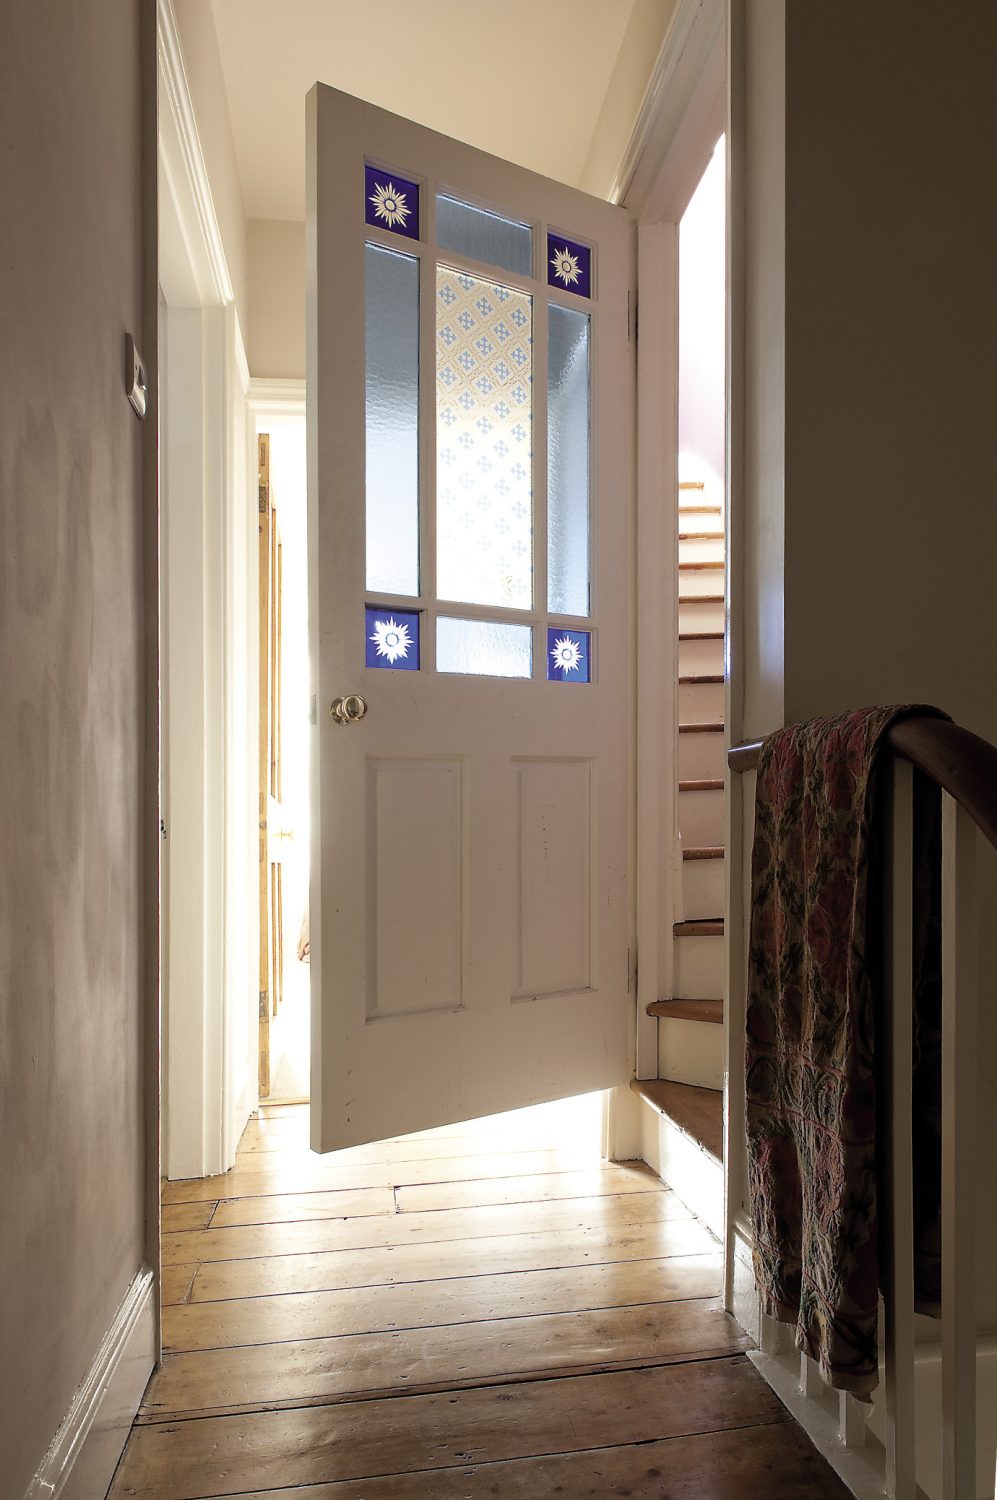 A wooden door with stained glass inserts leads to Bobby’s room on the top floor